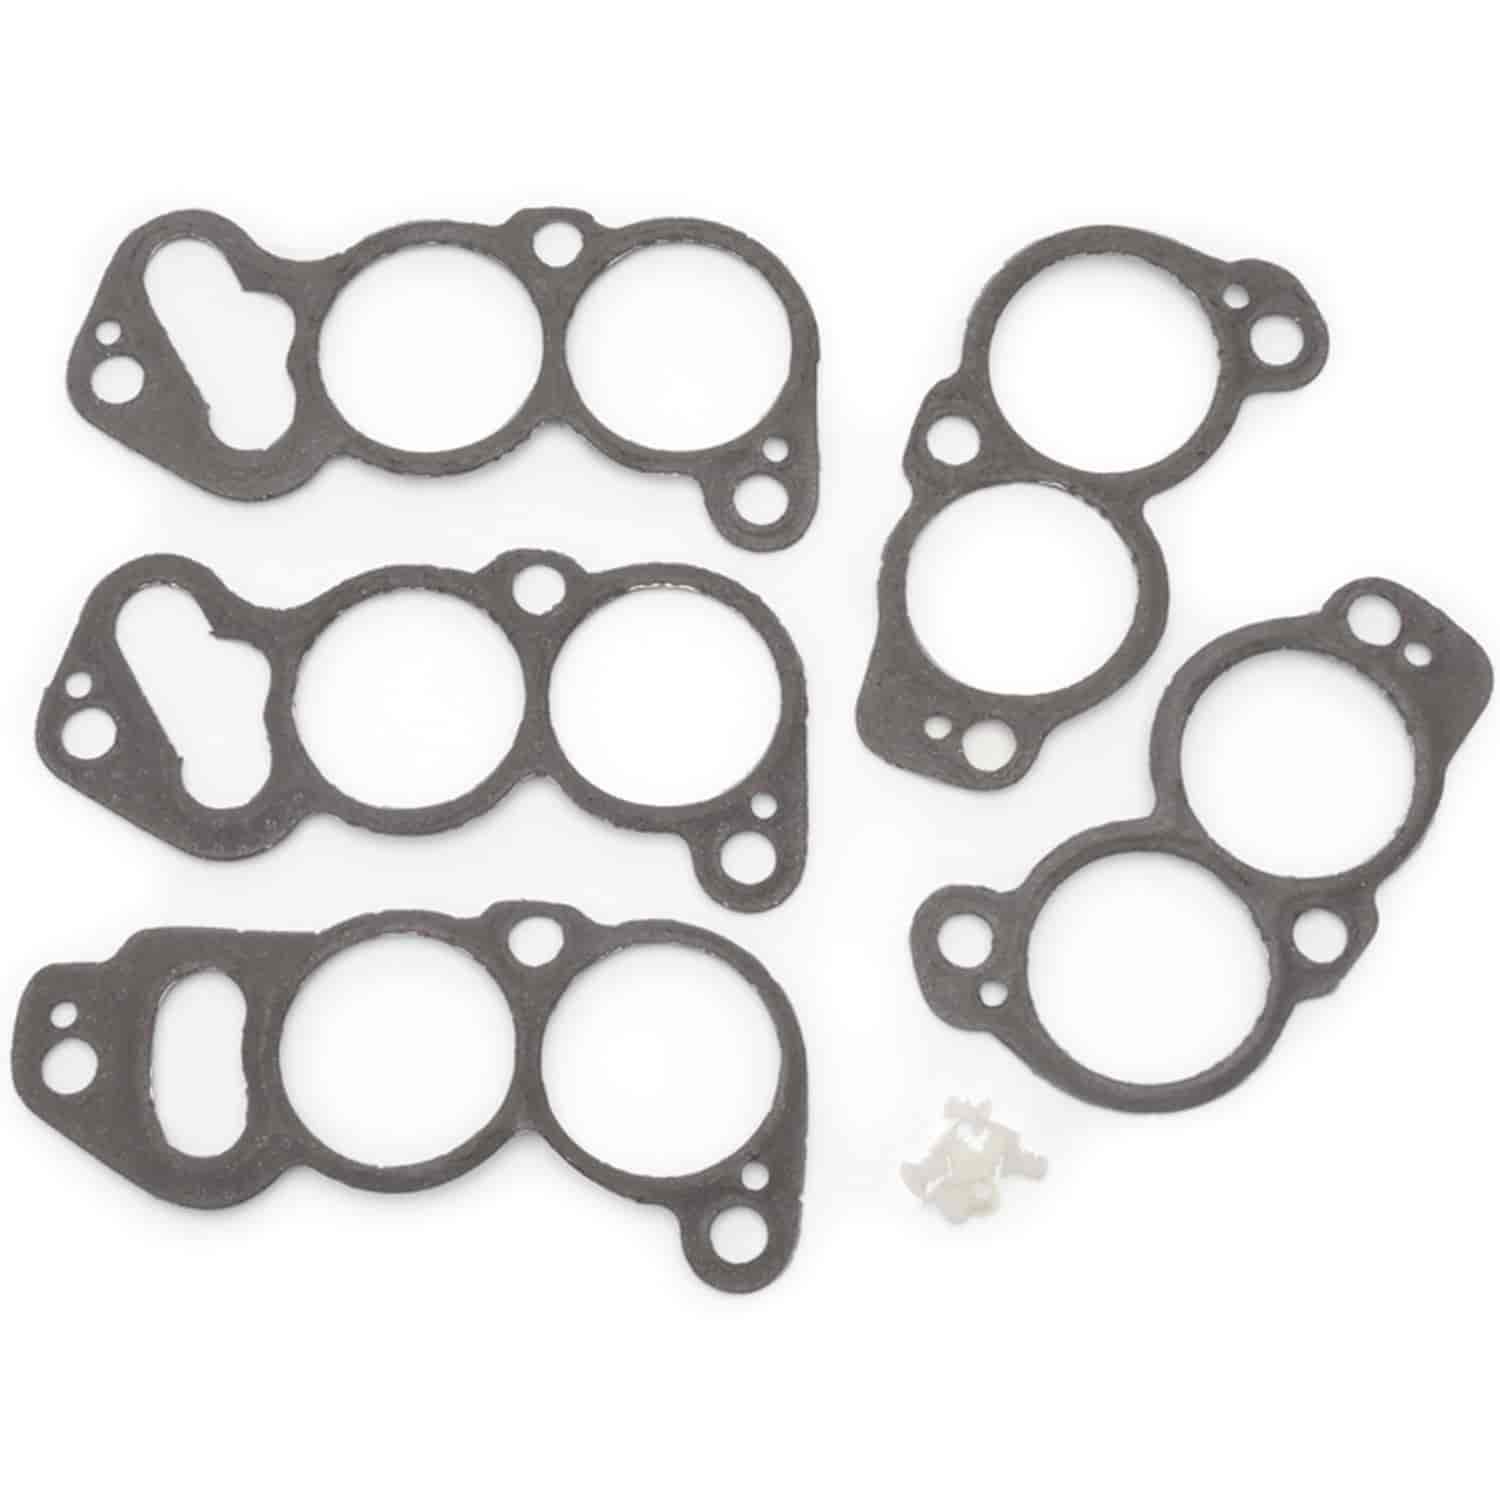 Replacement Gasket Set for Chevy 305-350 T.P.I Hight-Flo